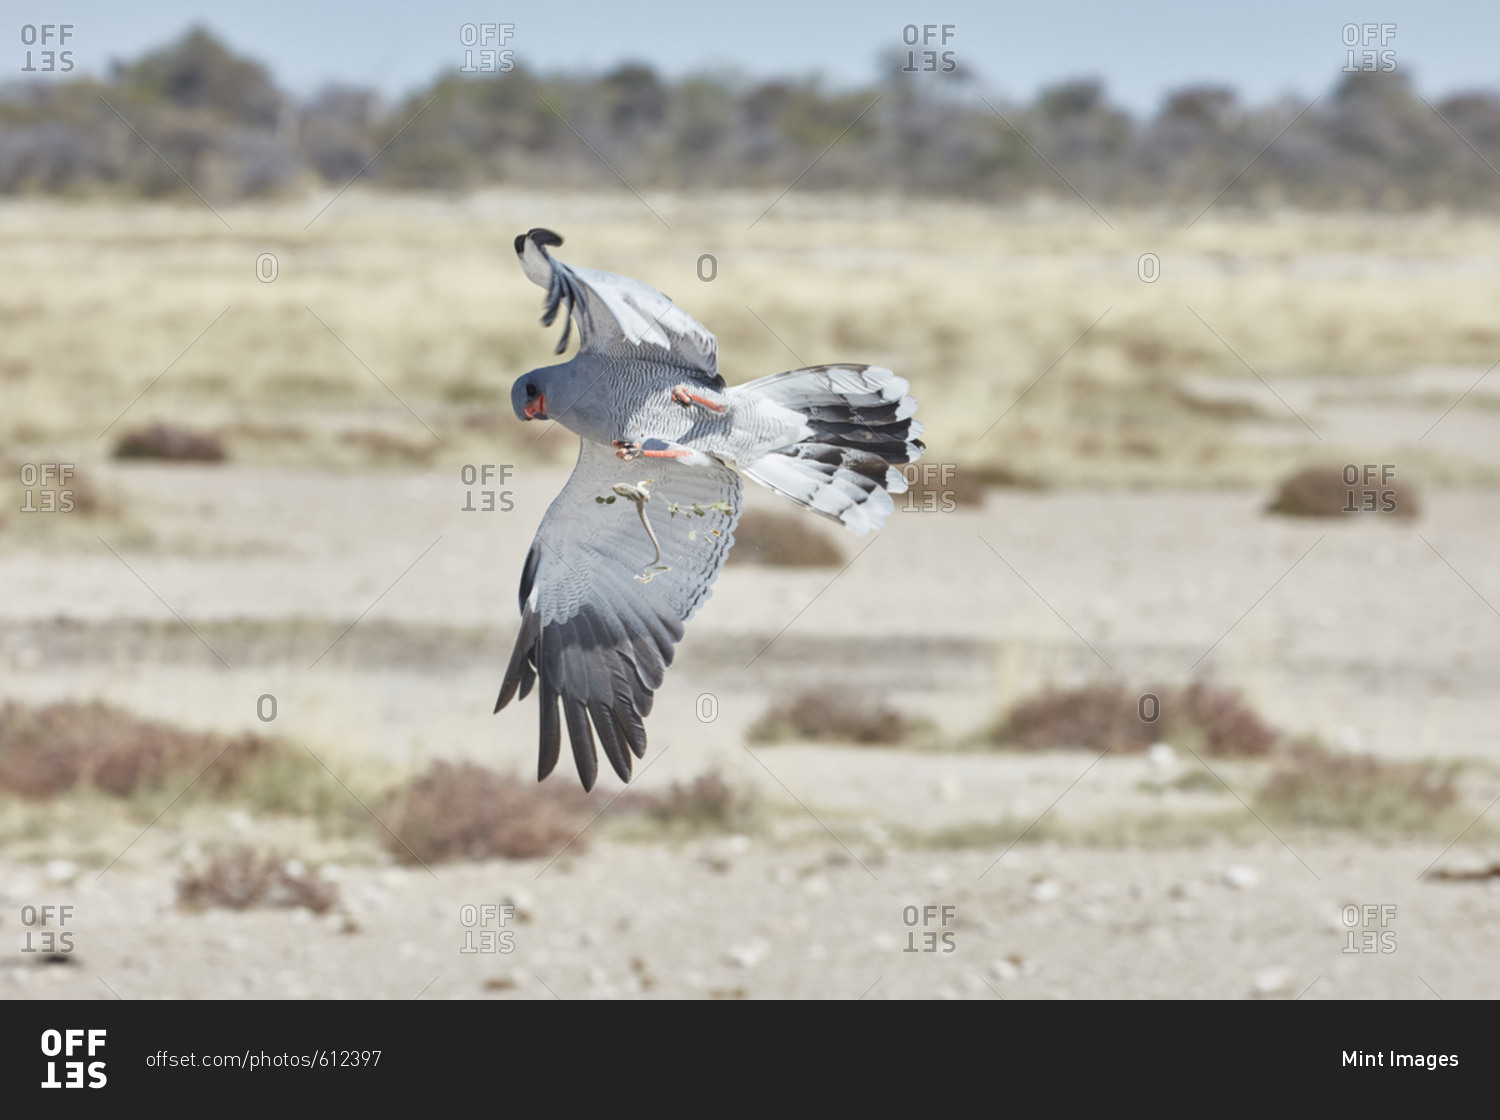 Bird in flight trying to catch prey A Pale Chanting Goshawk, Melierax canorus rising with wings outstretched, with a lizard falling from its talons